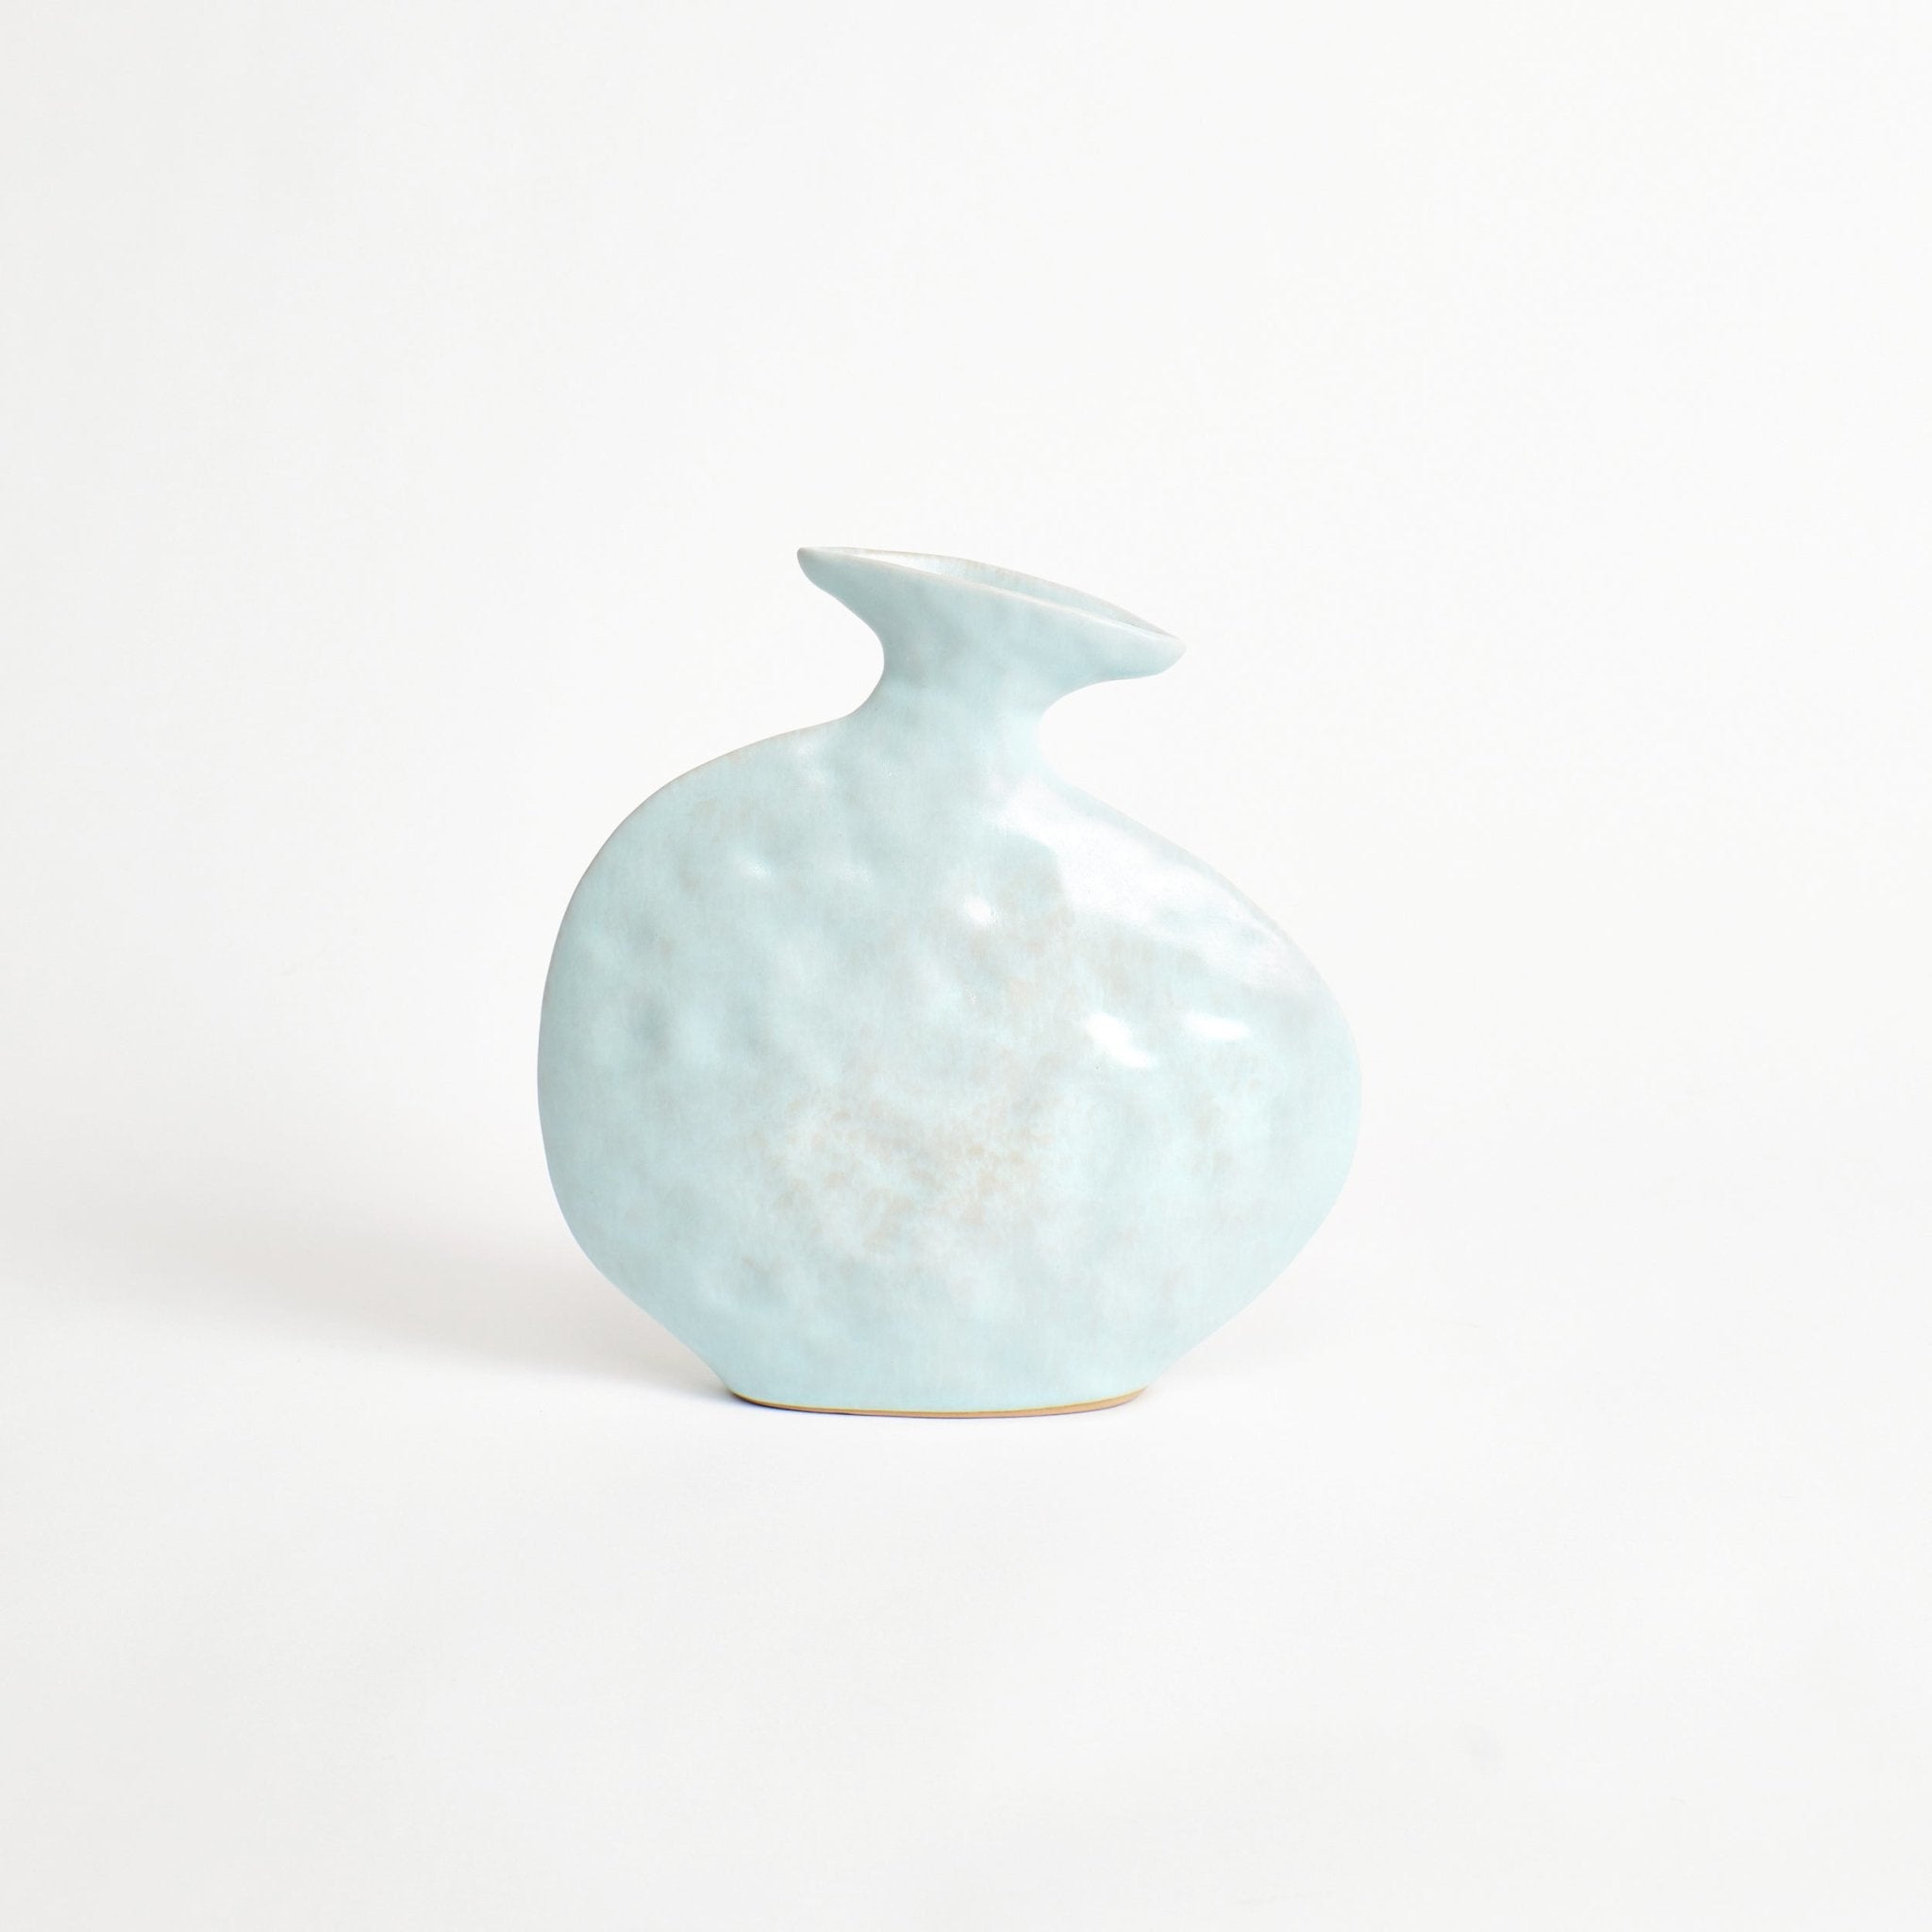 Flat Vase - Light blue vase from Project 213A